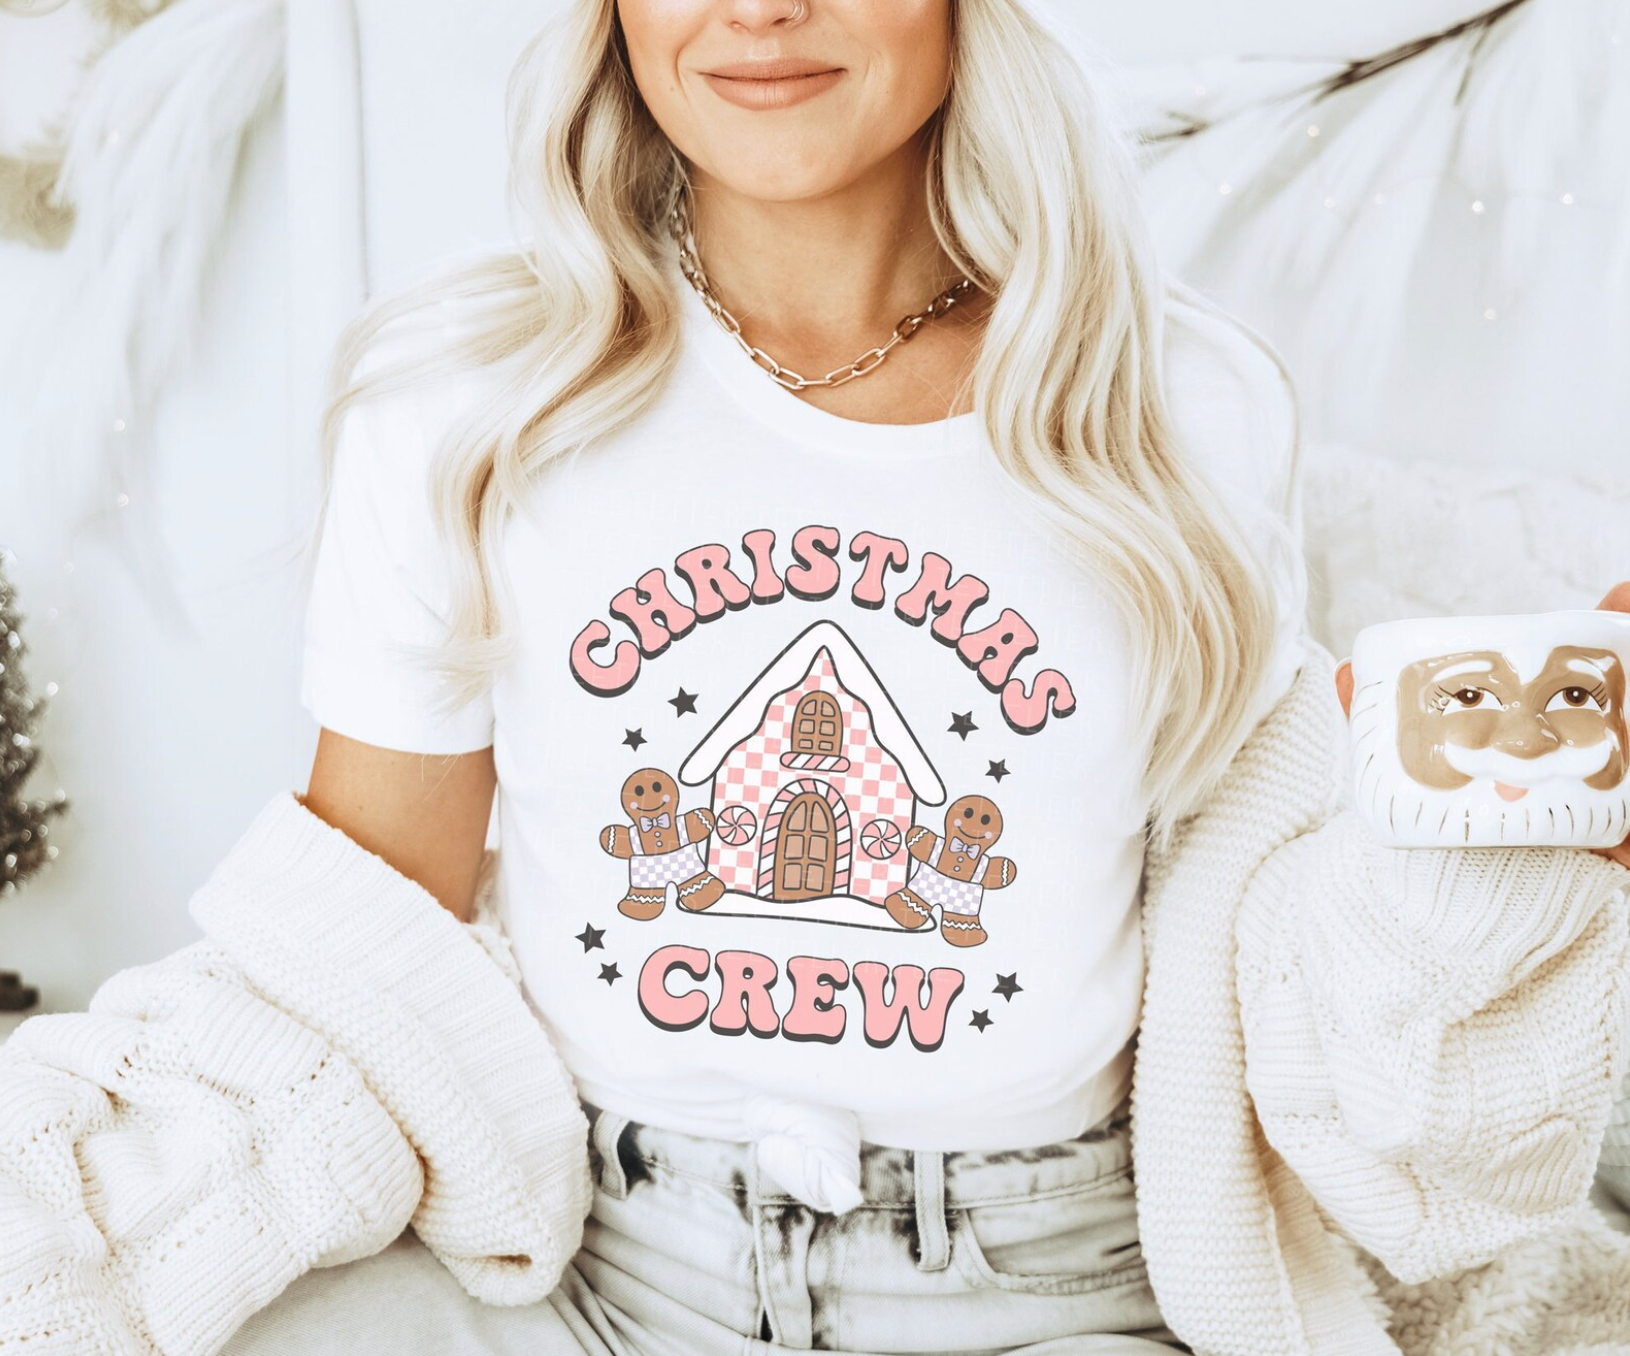 Matching Family Christmas Crew Gingerbread House White Shirts